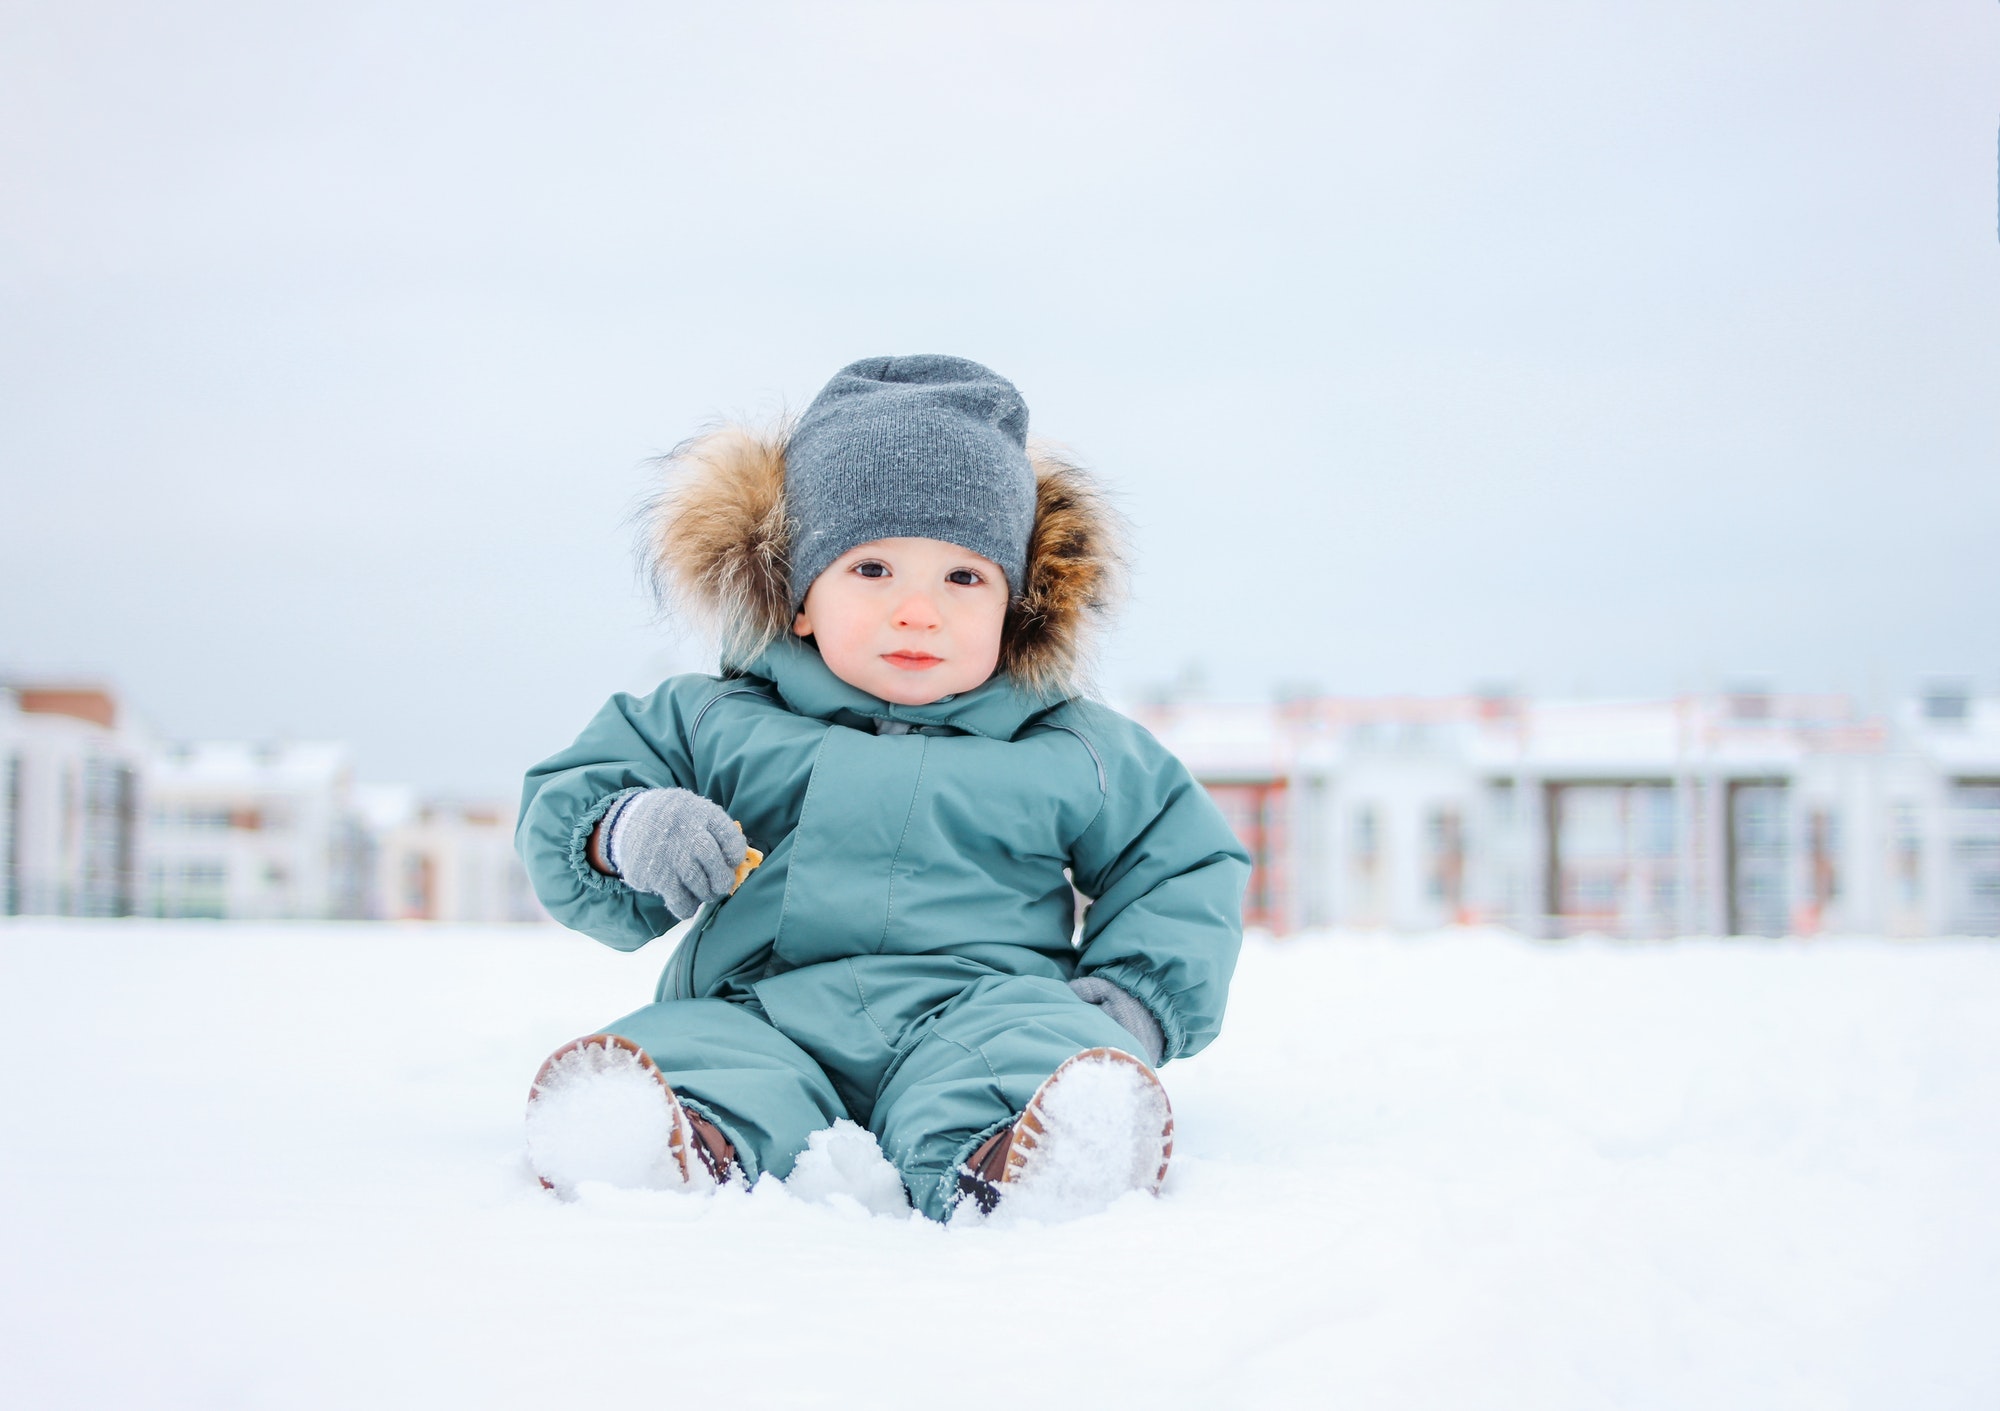 Cute baby boy in the mint winter suit sitting on snow outdoor